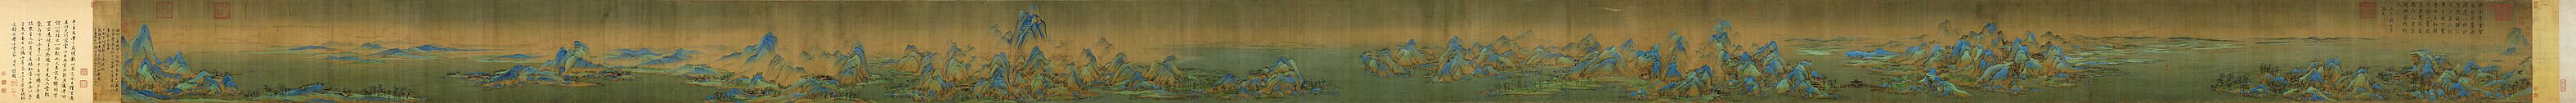 A Thousand Li of Rivers and Mountains, at and by Wang Ximeng